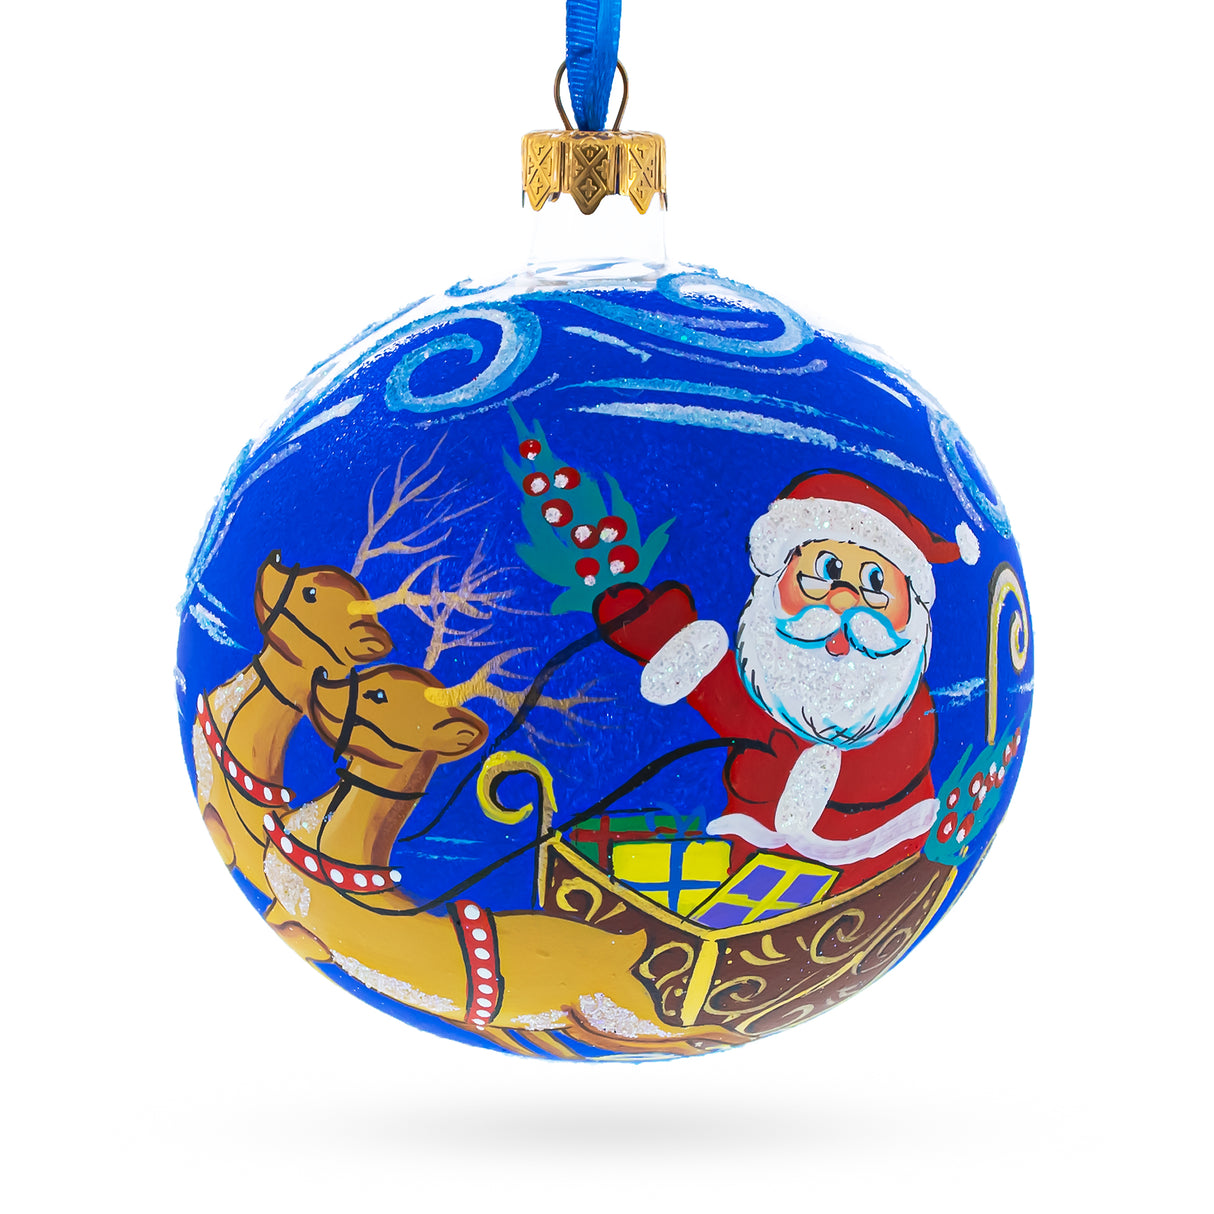 Jolly Santa Riding Sleigh with Reindeer Blown Glass Ball Christmas Ornament 4 Inches in Blue color, Round shape